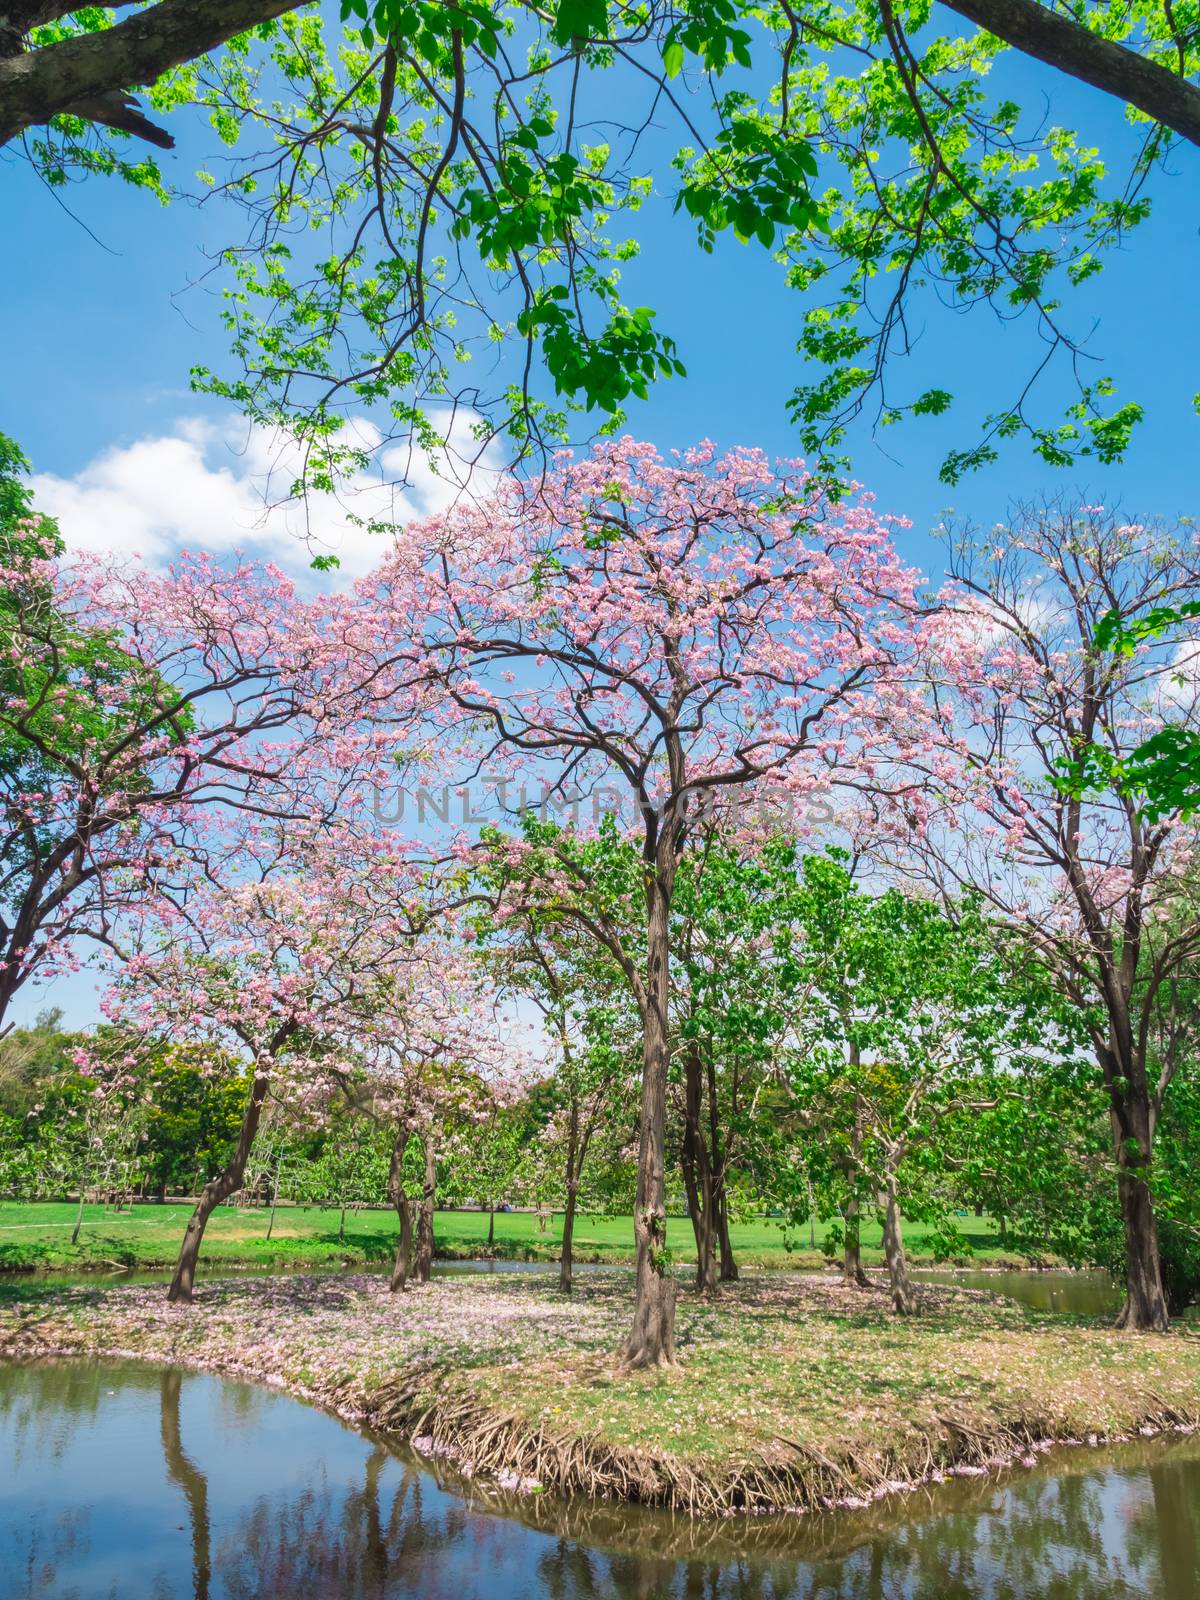 Flowers of pink trumpet trees are blossoming in Public park of Bangkok, Thailand by ronnarong